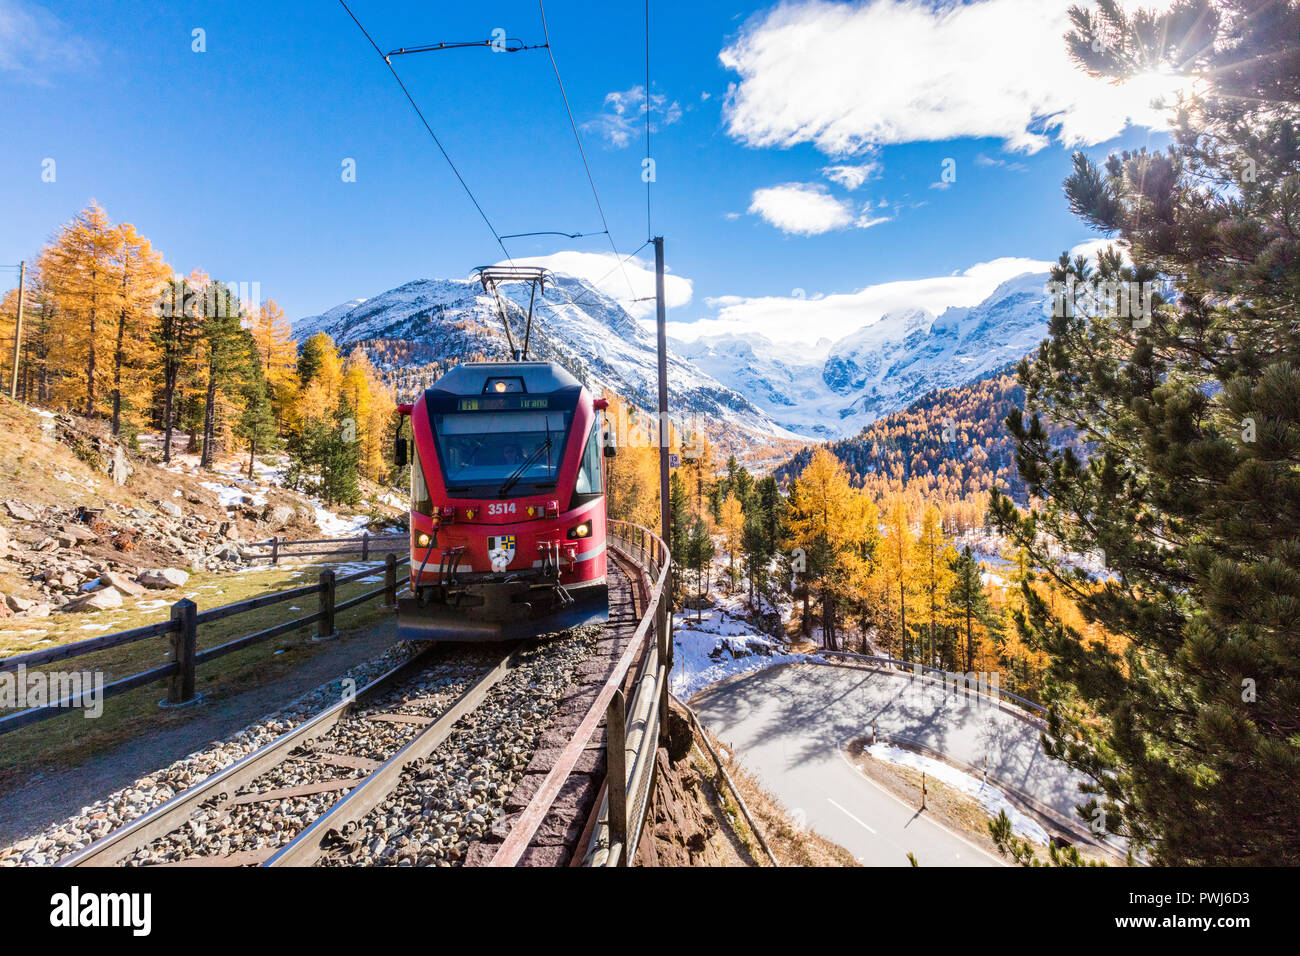 Bernina Express train surrounded by colorful woods and snowy peaks Bernina Pass Canton of Graubünden Engadin Switzerland Europe Stock Photo